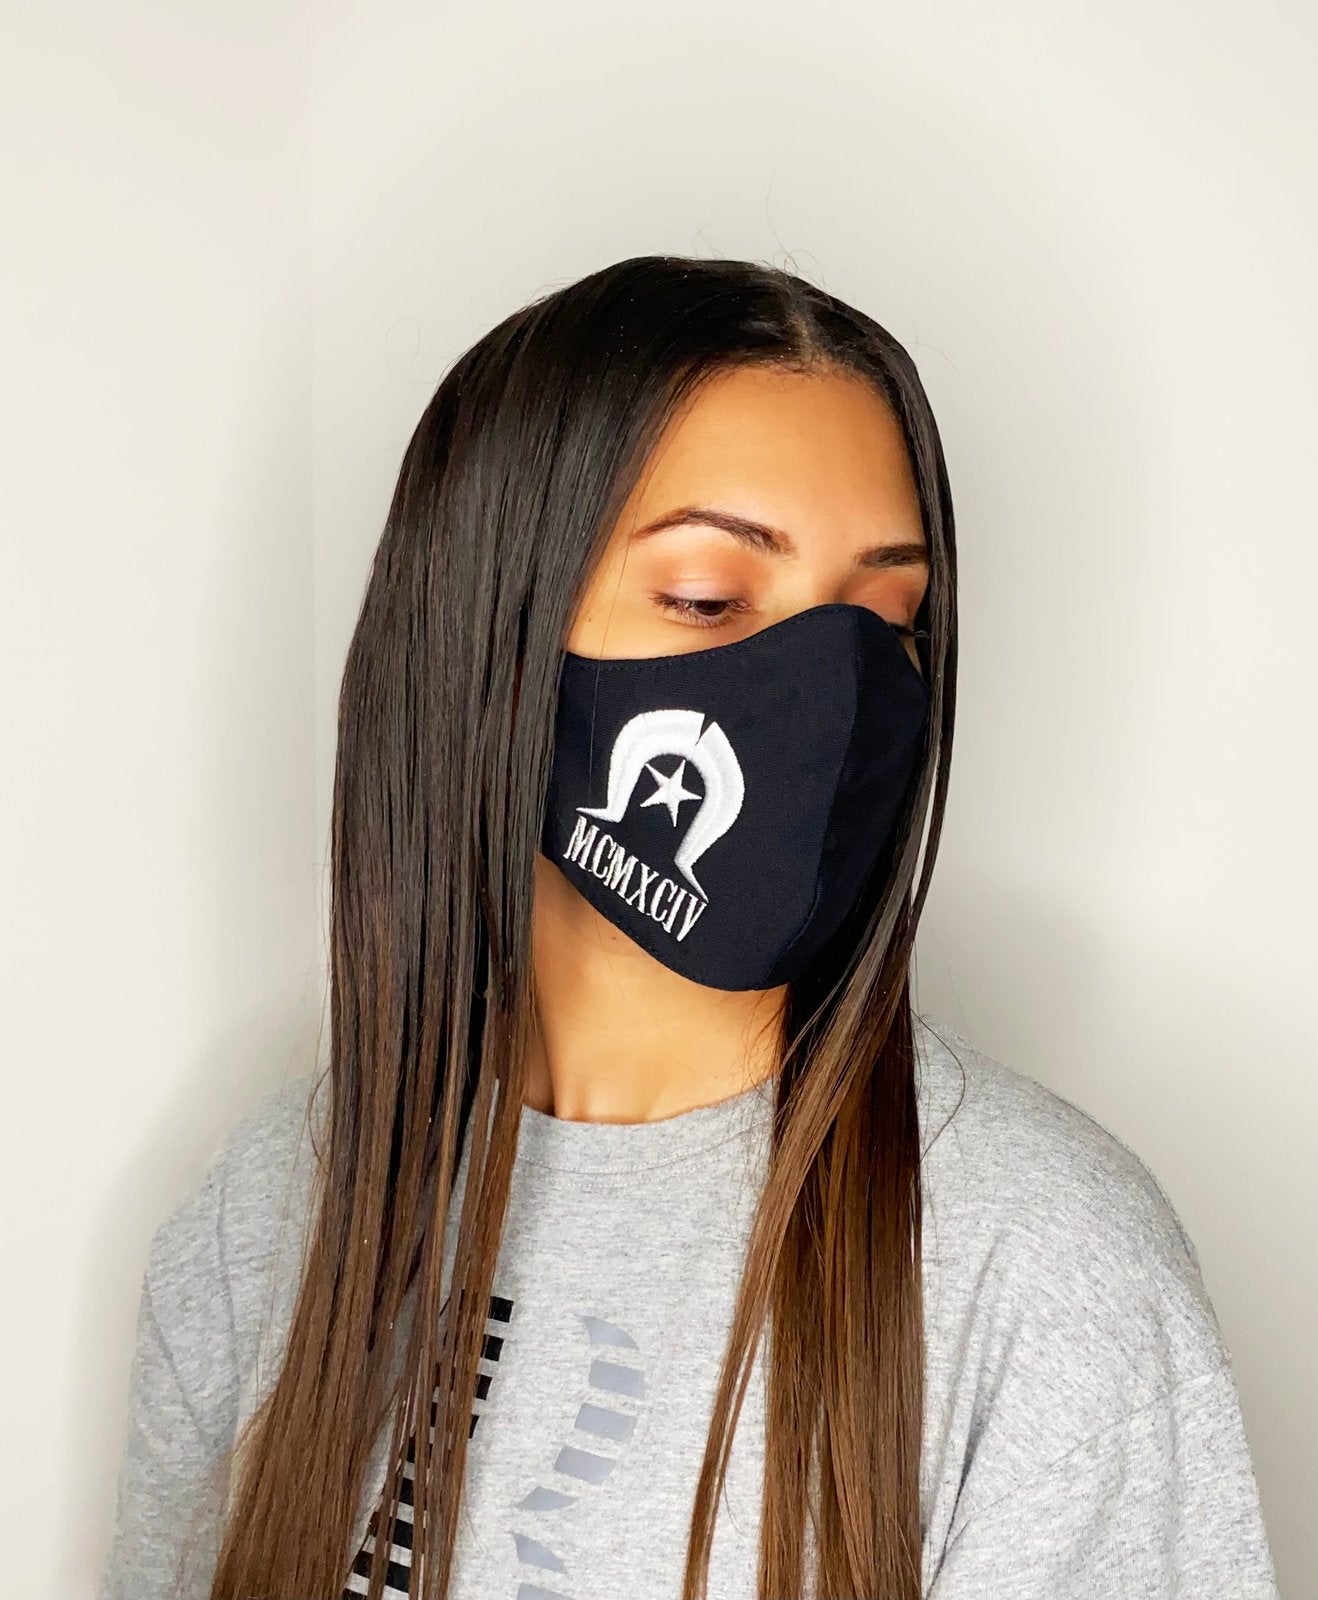 DHARI 94 MASK 1 (One size fits all)